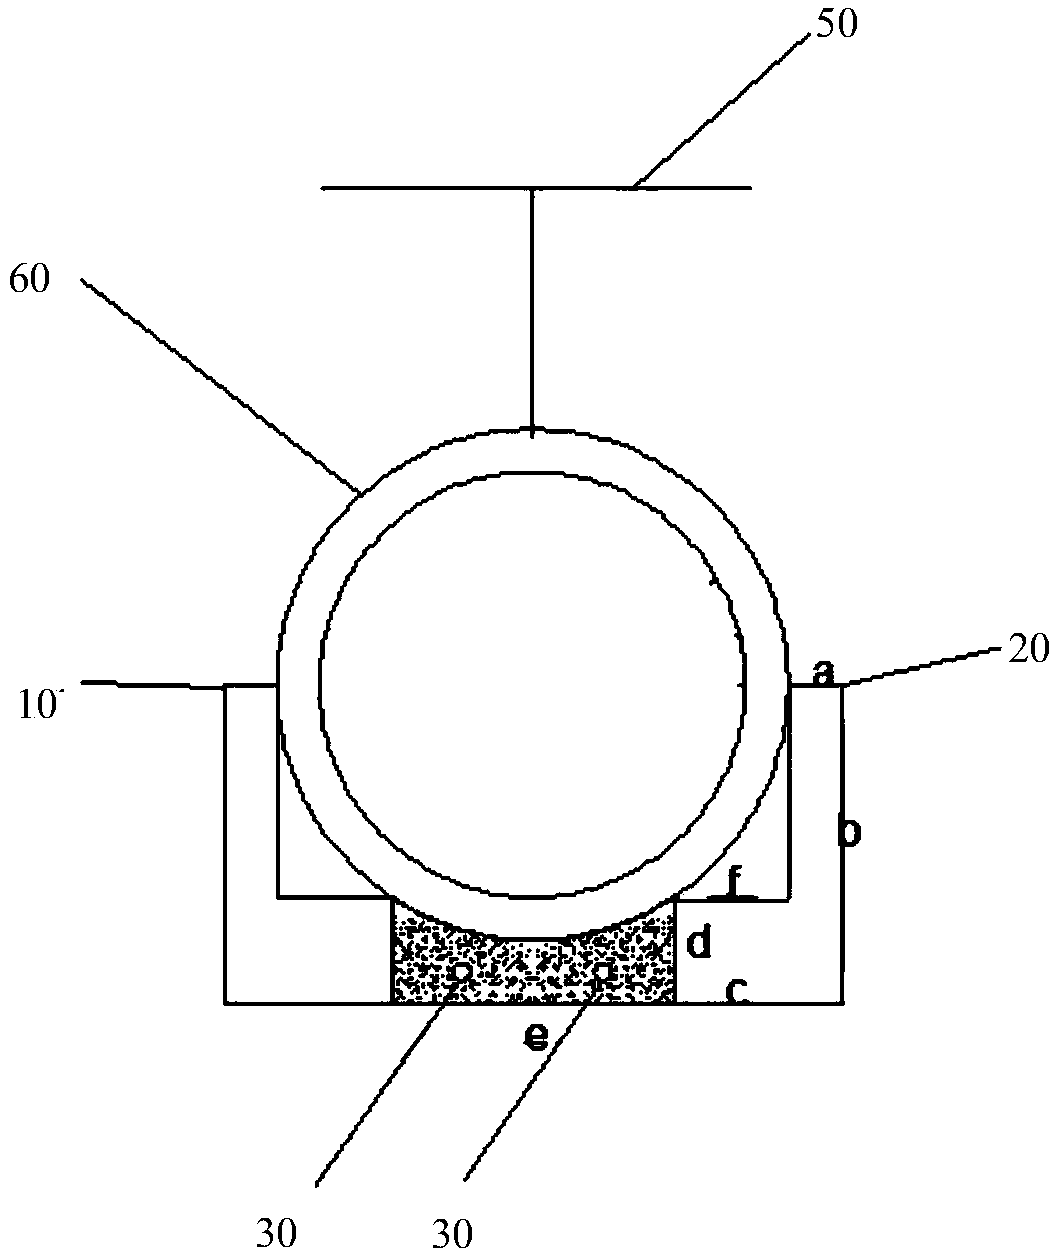 Drainage pipeline positioning device